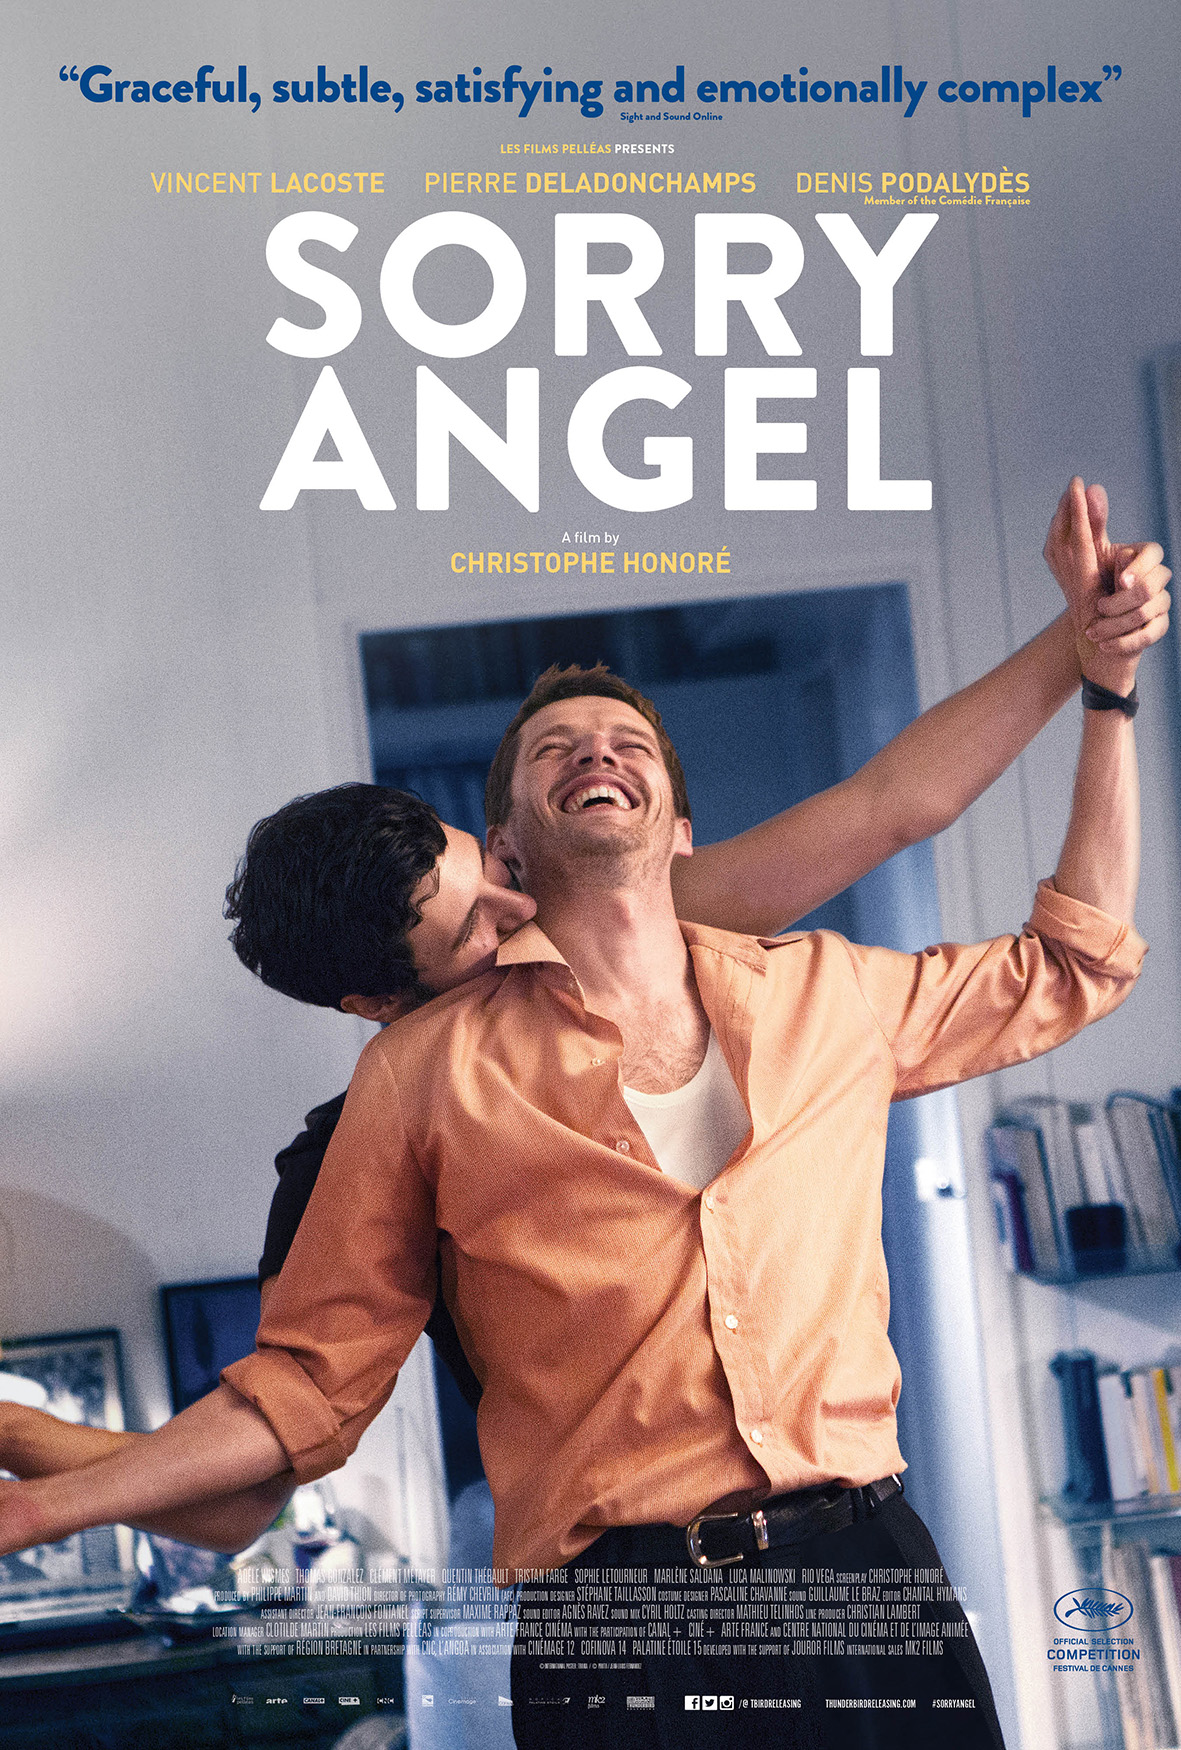 Pride Month Series/Foreign Film Lovers Club: “Sorry Angel”